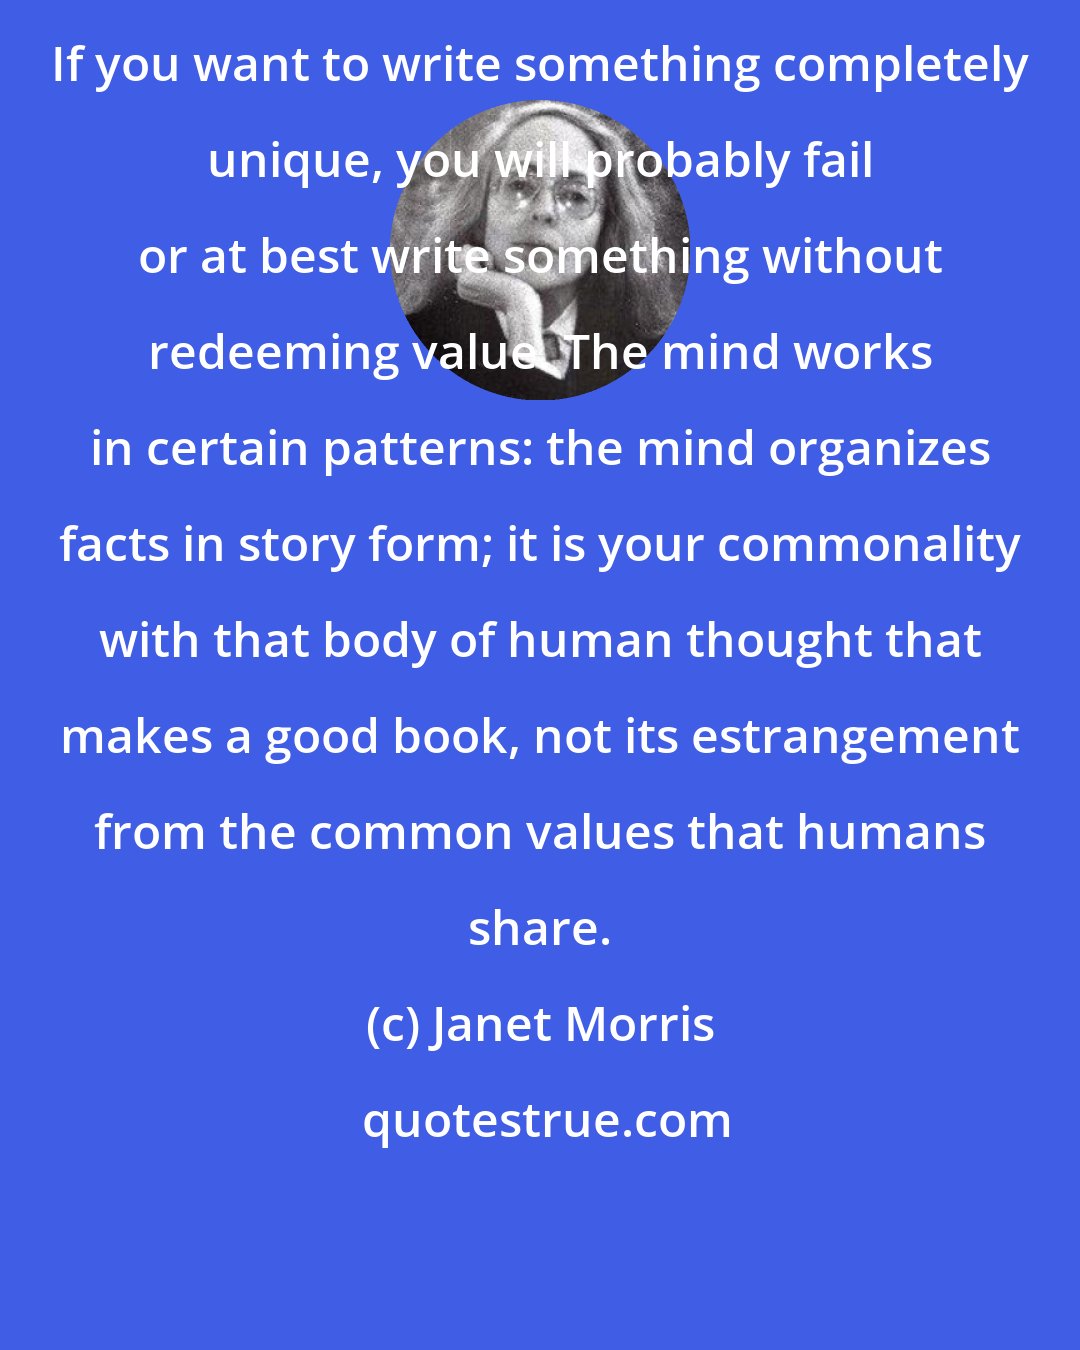 Janet Morris: If you want to write something completely unique, you will probably fail or at best write something without redeeming value. The mind works in certain patterns: the mind organizes facts in story form; it is your commonality with that body of human thought that makes a good book, not its estrangement from the common values that humans share.